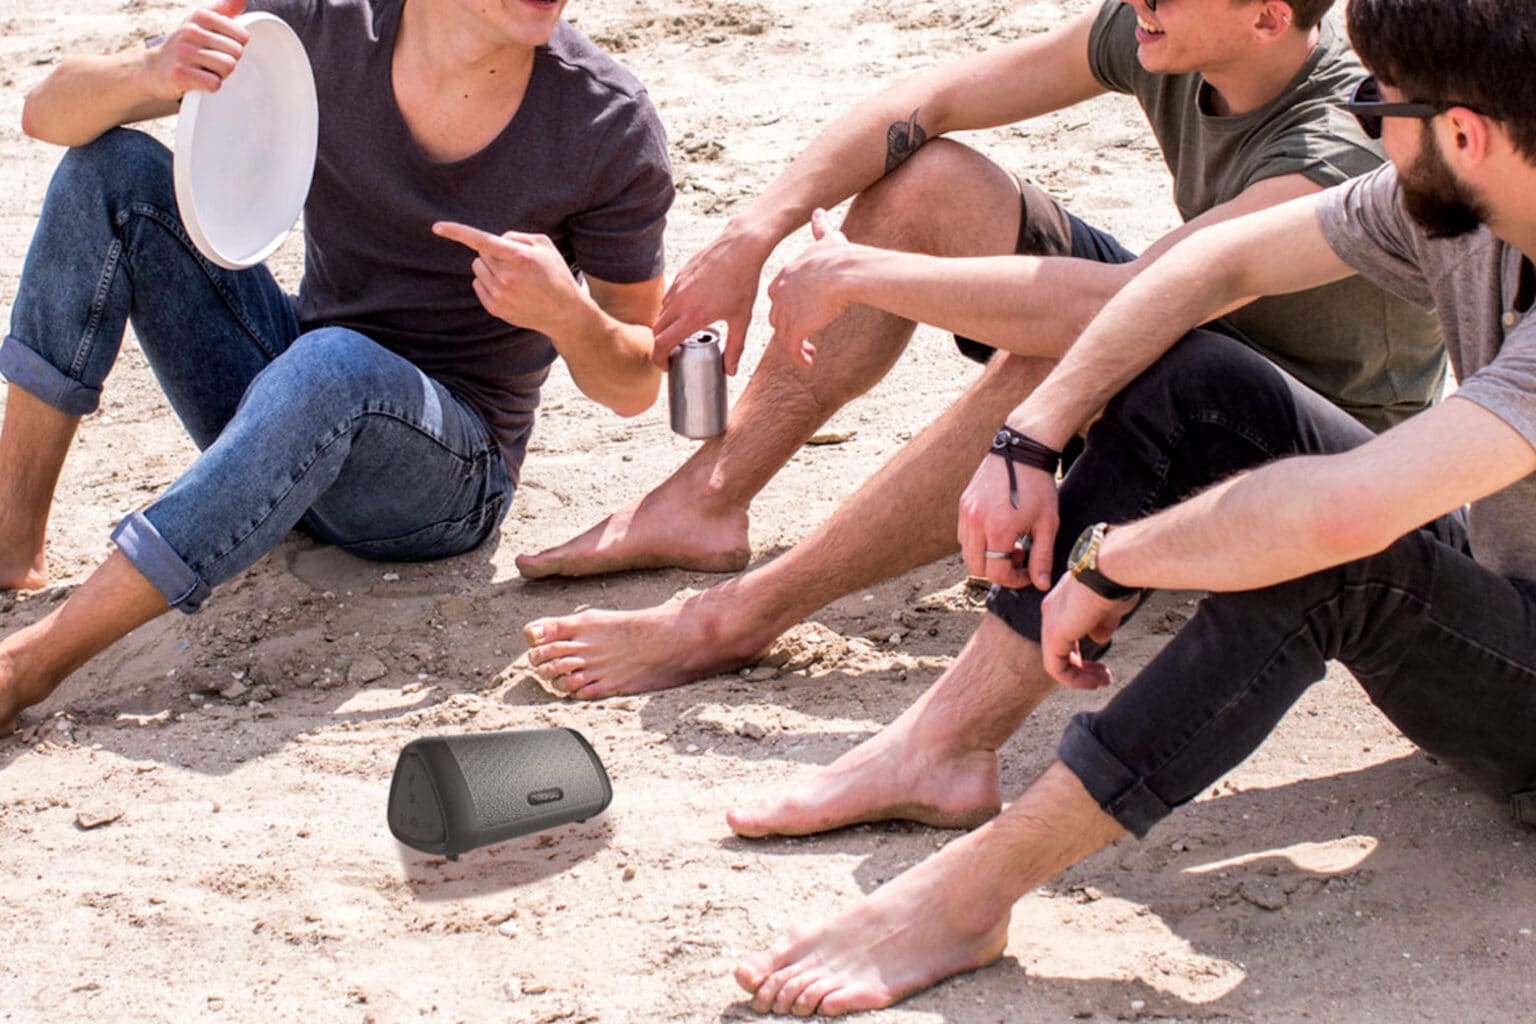 The Motorola speaker is ideal for all situations